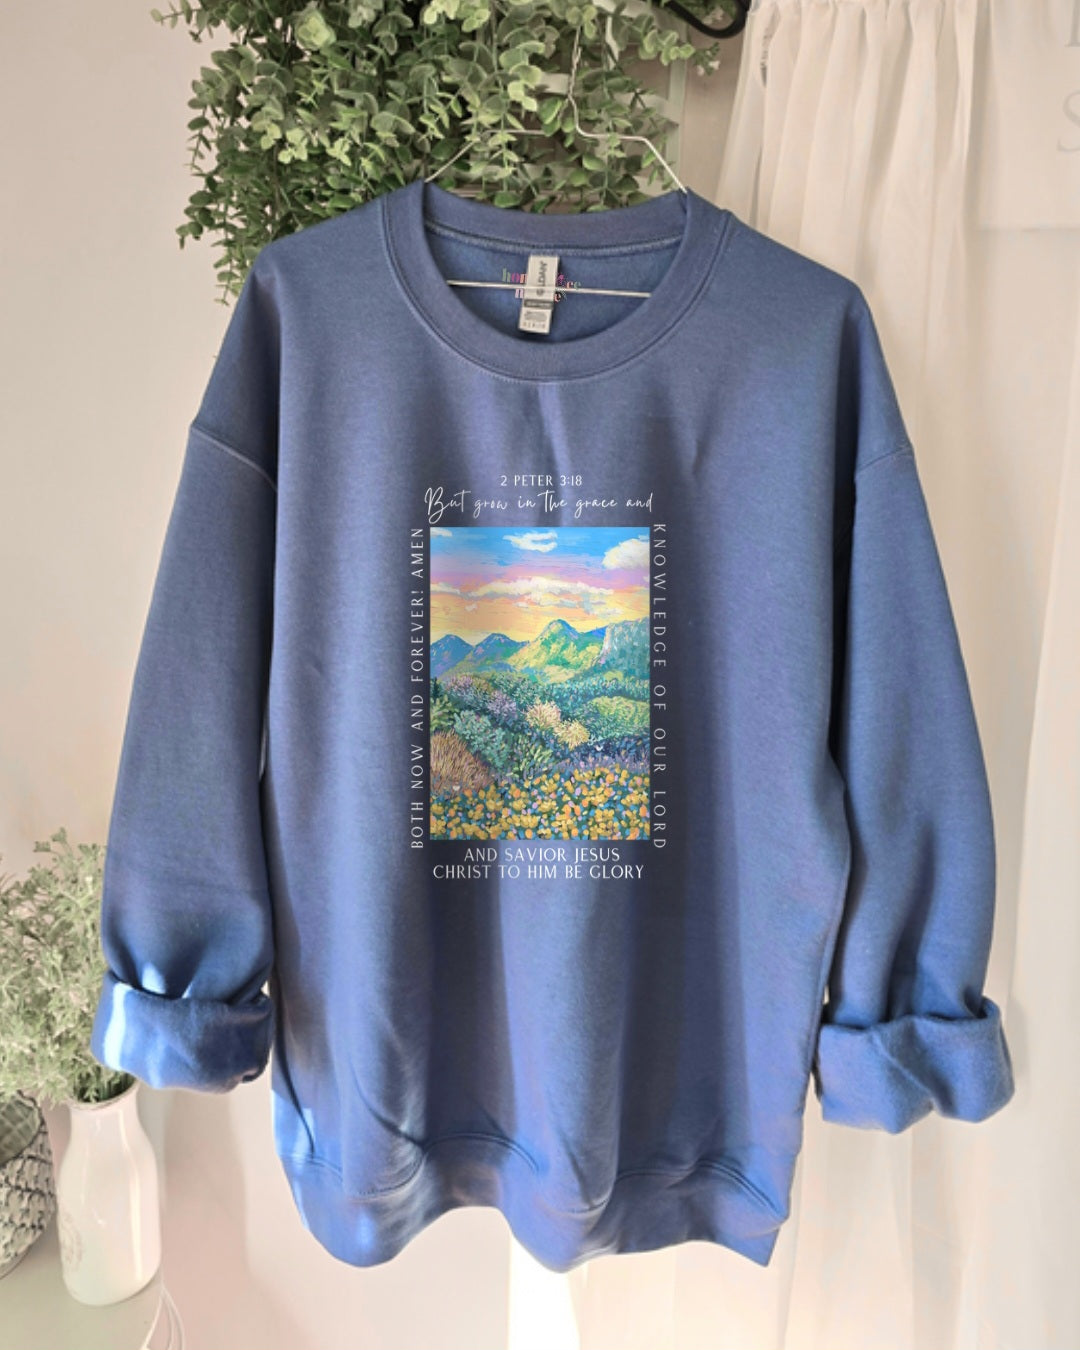 Grow in Grace and Knowledge of The Lord. Stone Blue Crewneck Sweatshirt.